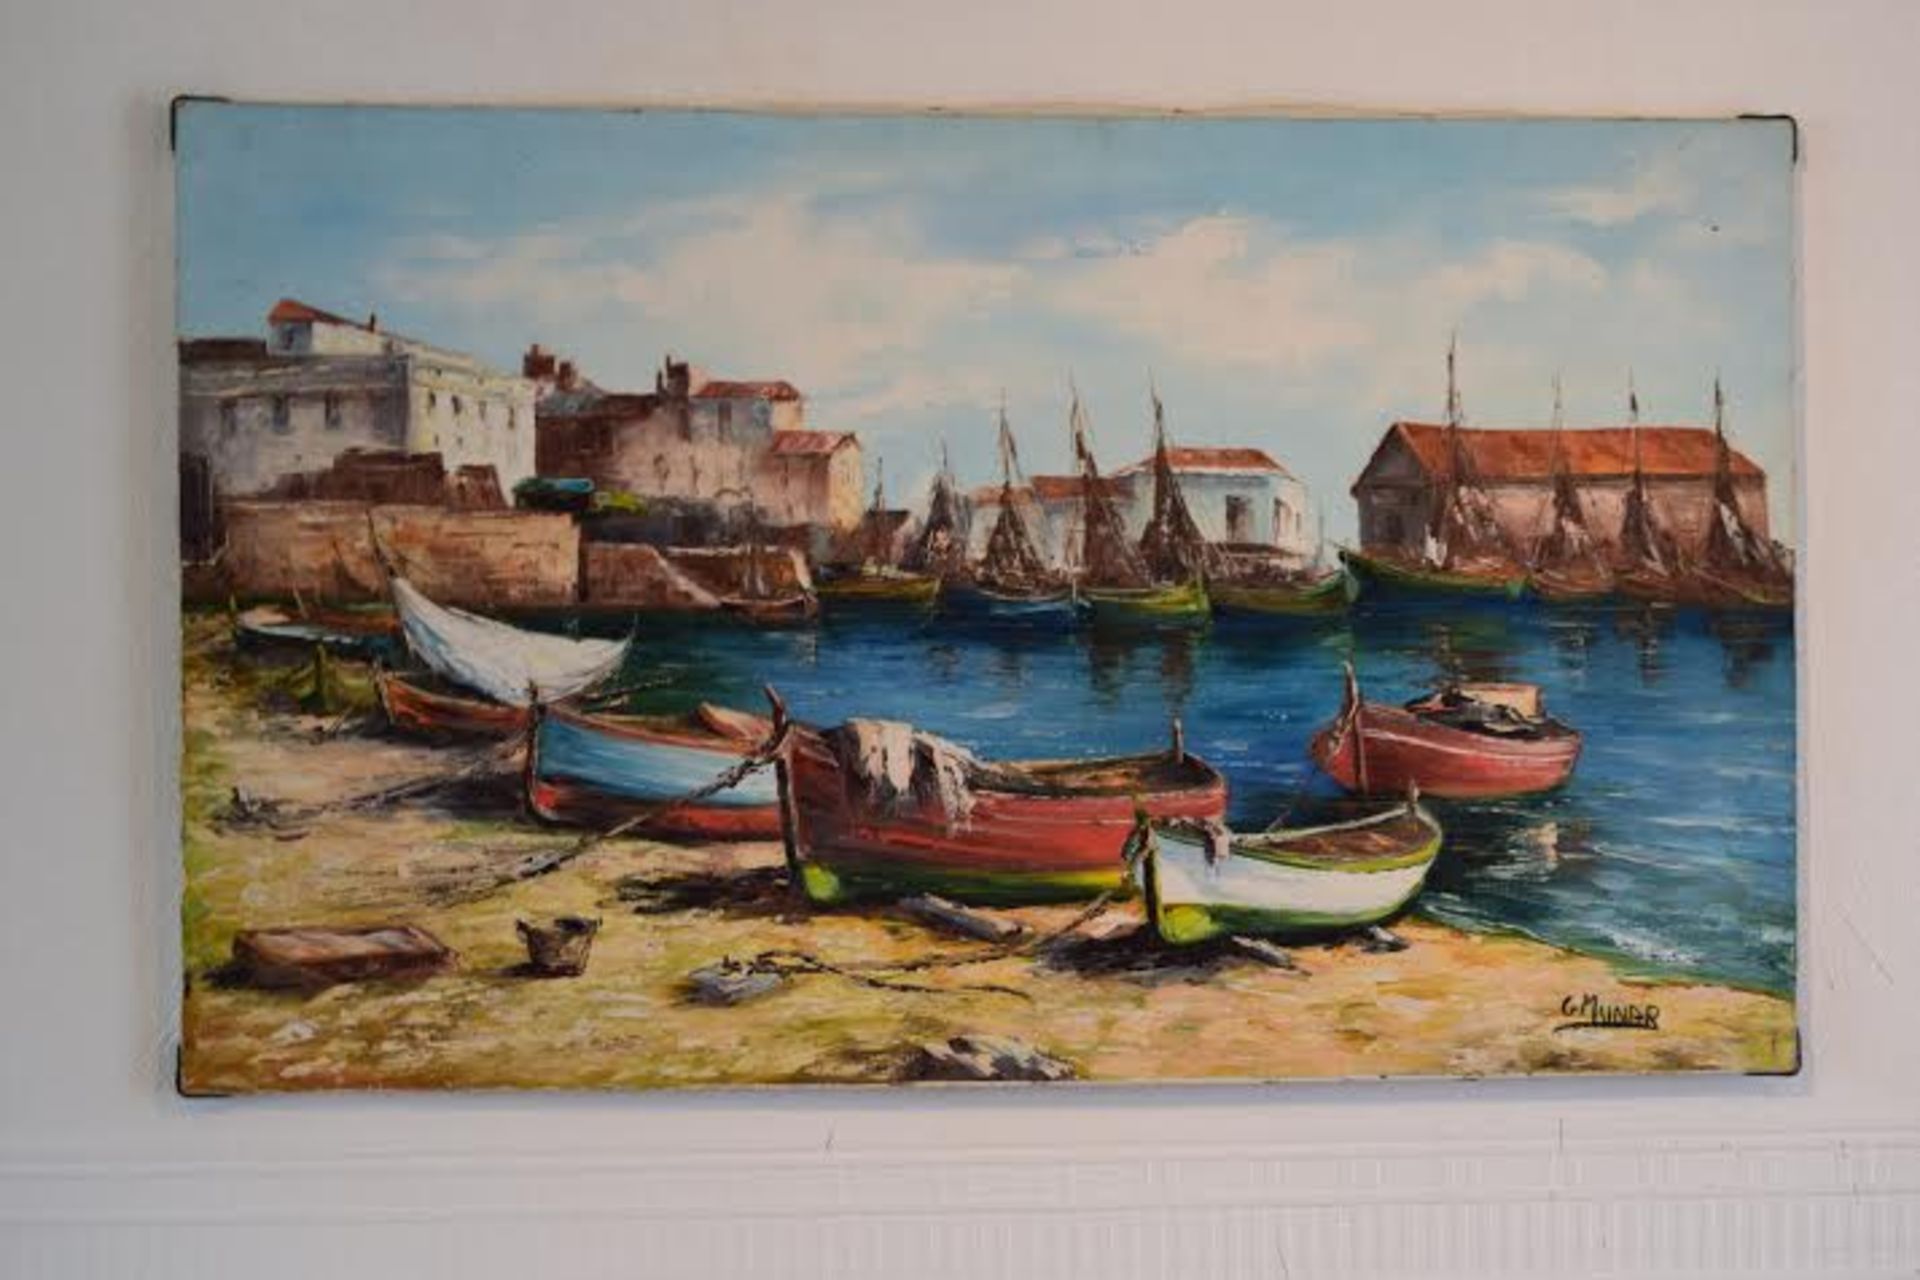 A stunning oil on canvas picture of a harbour in Mallorca by artist G.Munar.